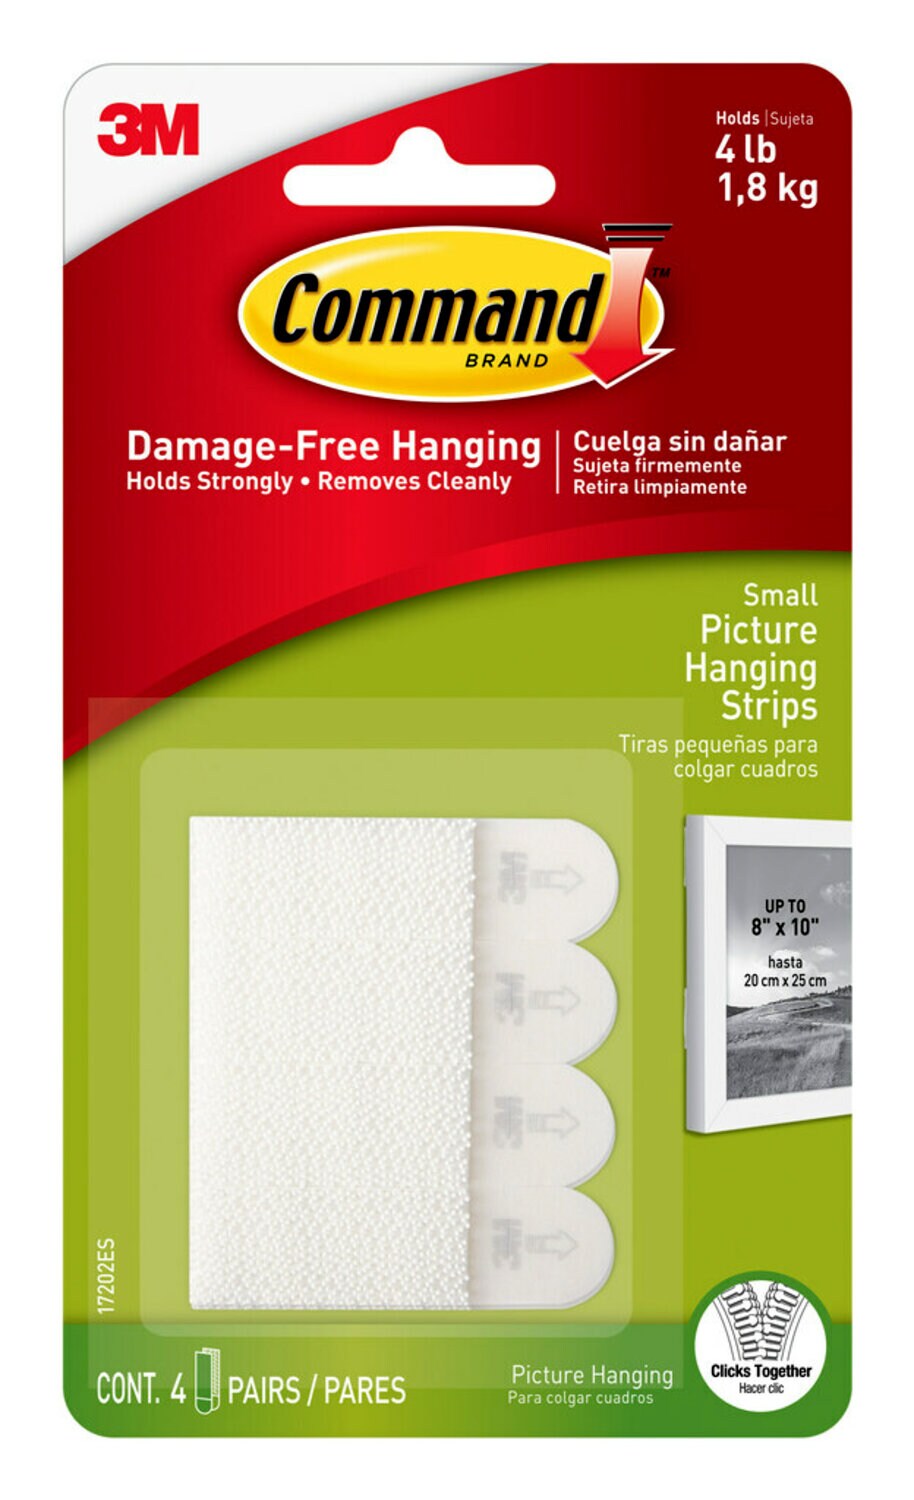 7000038170 - Command Small Picture Hanging Strips 17202ANZ, CMD, 9 Packs/Bag, 3 Bags/Case